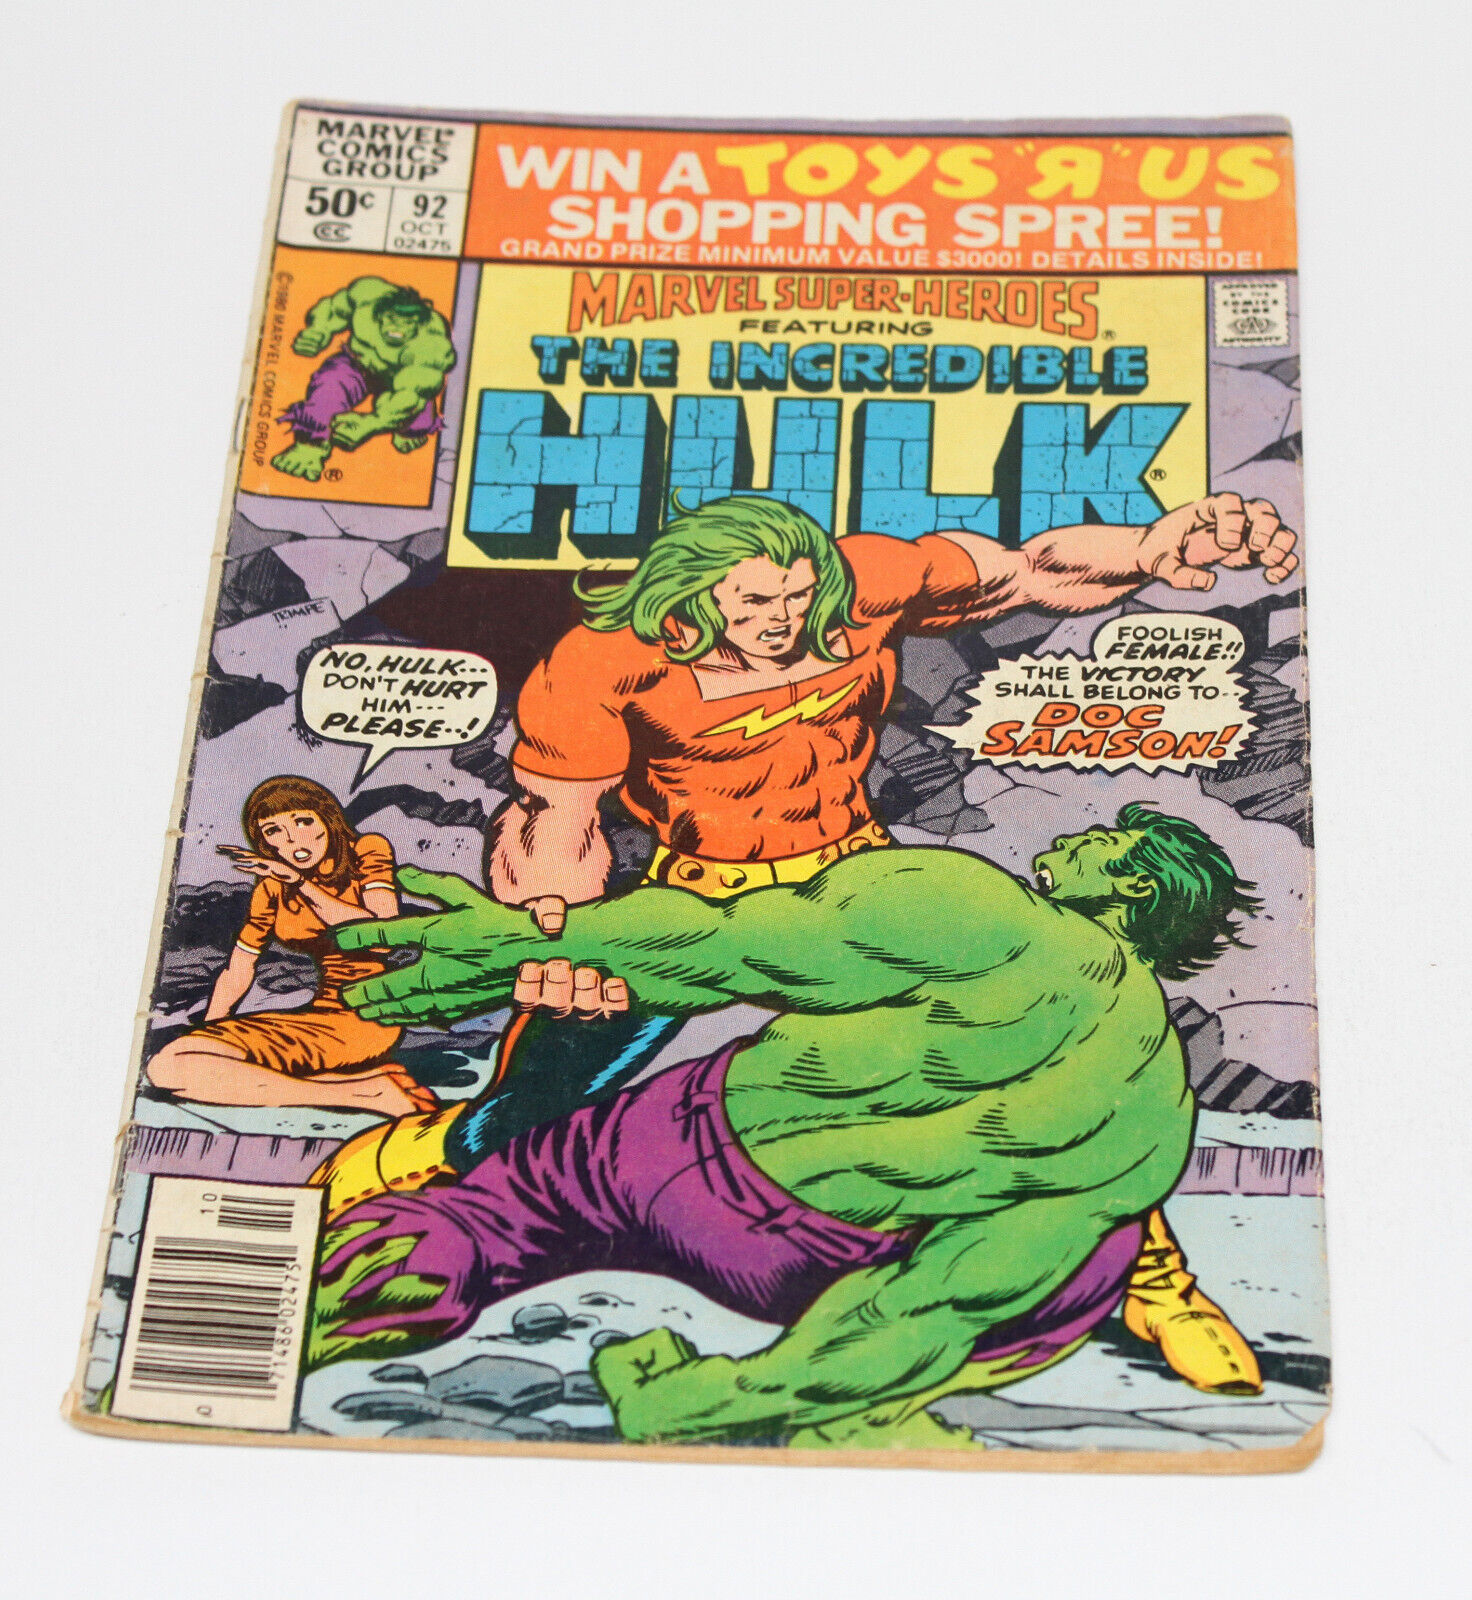 1980 Marvel Super-Heroes The Incredible Hulk Marvel Comic Group Issue Vol.1 #92